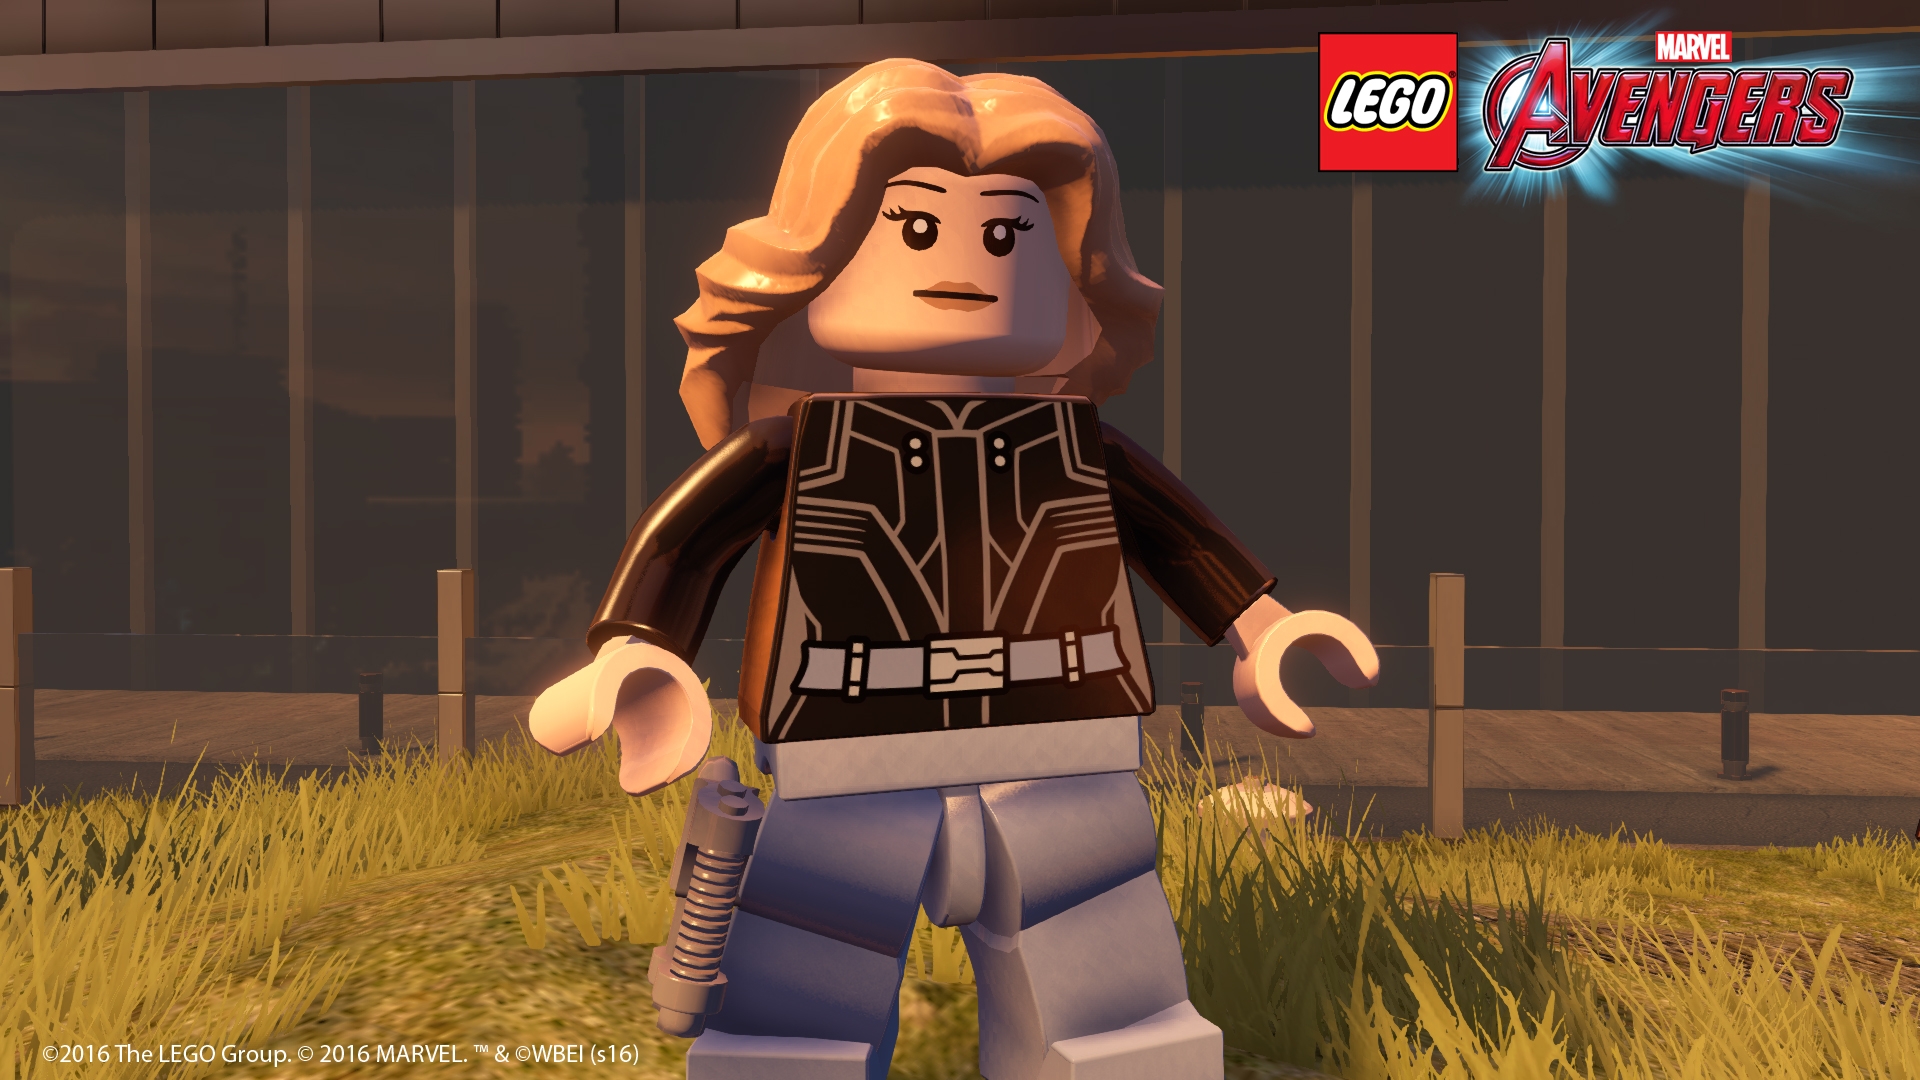 Lego Marvel’s Avengers DLC only on PlayStation